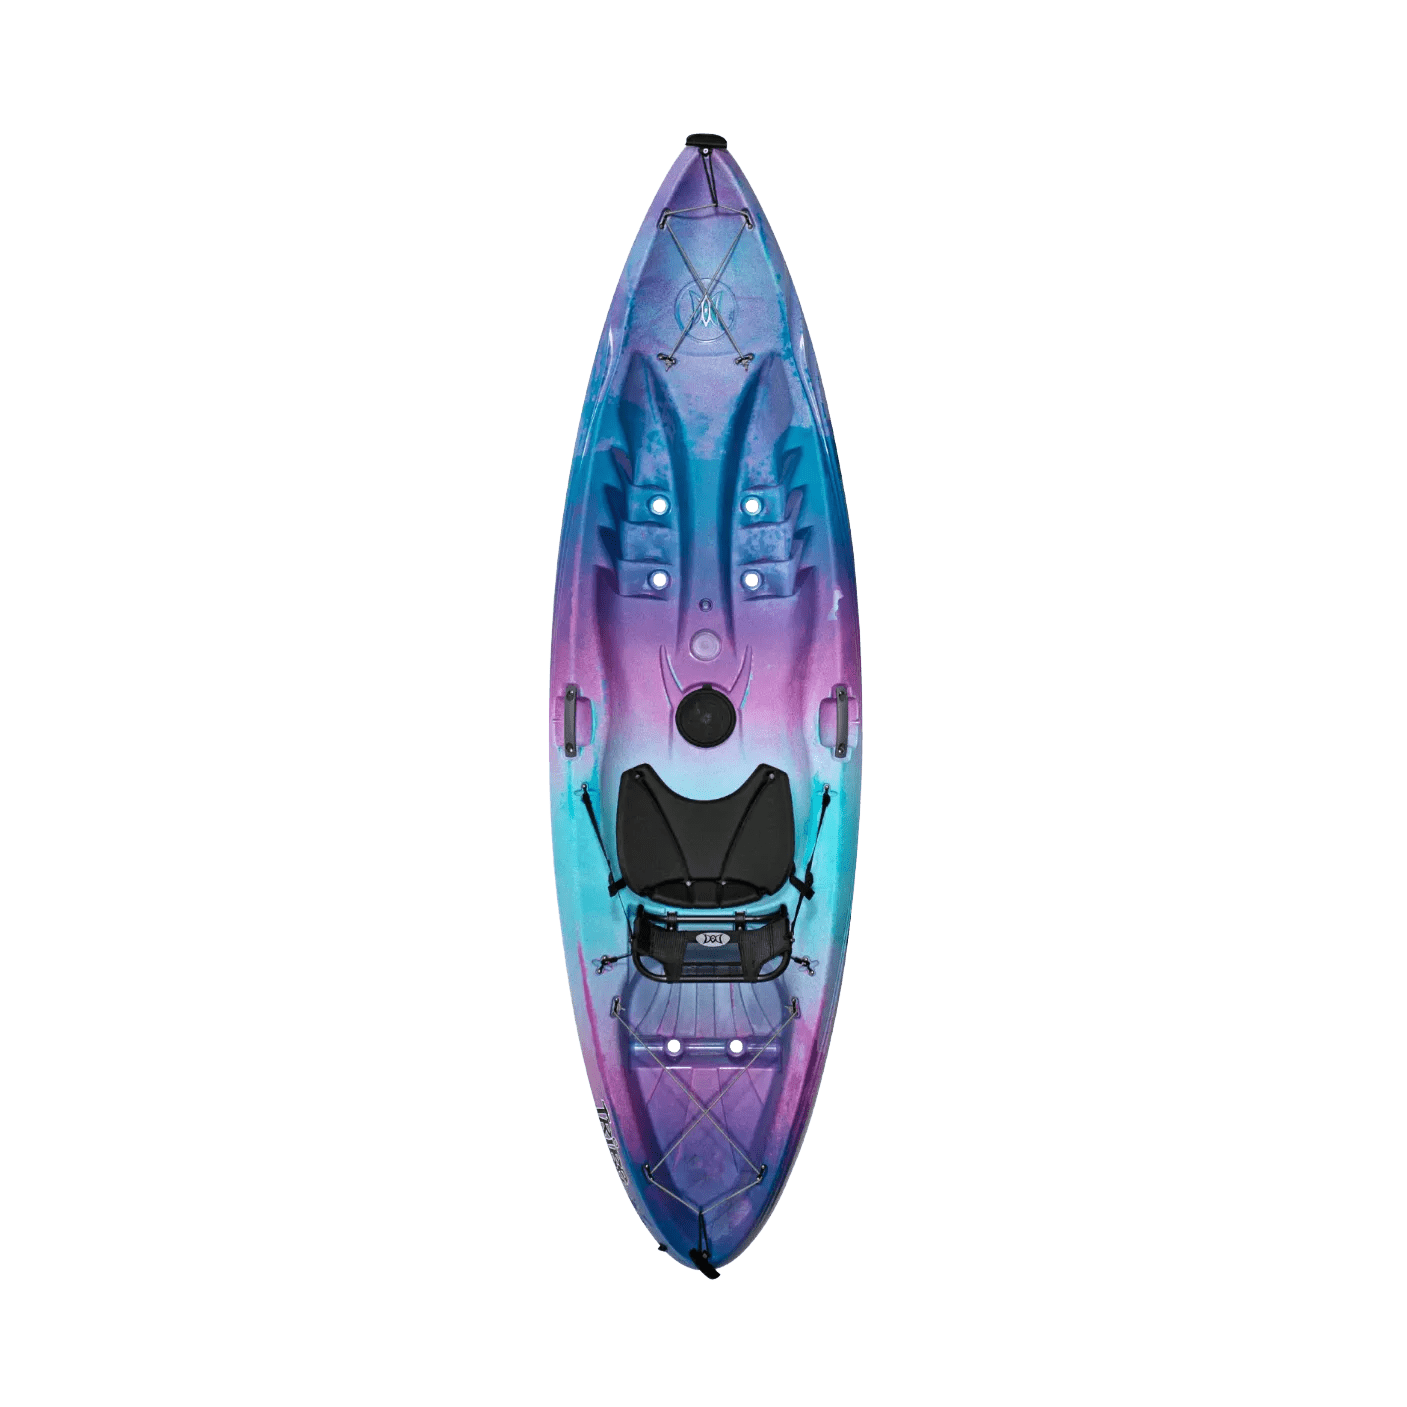 PERCEPTION - Tribe 9.5 Recreational Kayak - Discontinued color/model - Violet - 9350950173 - TOP 